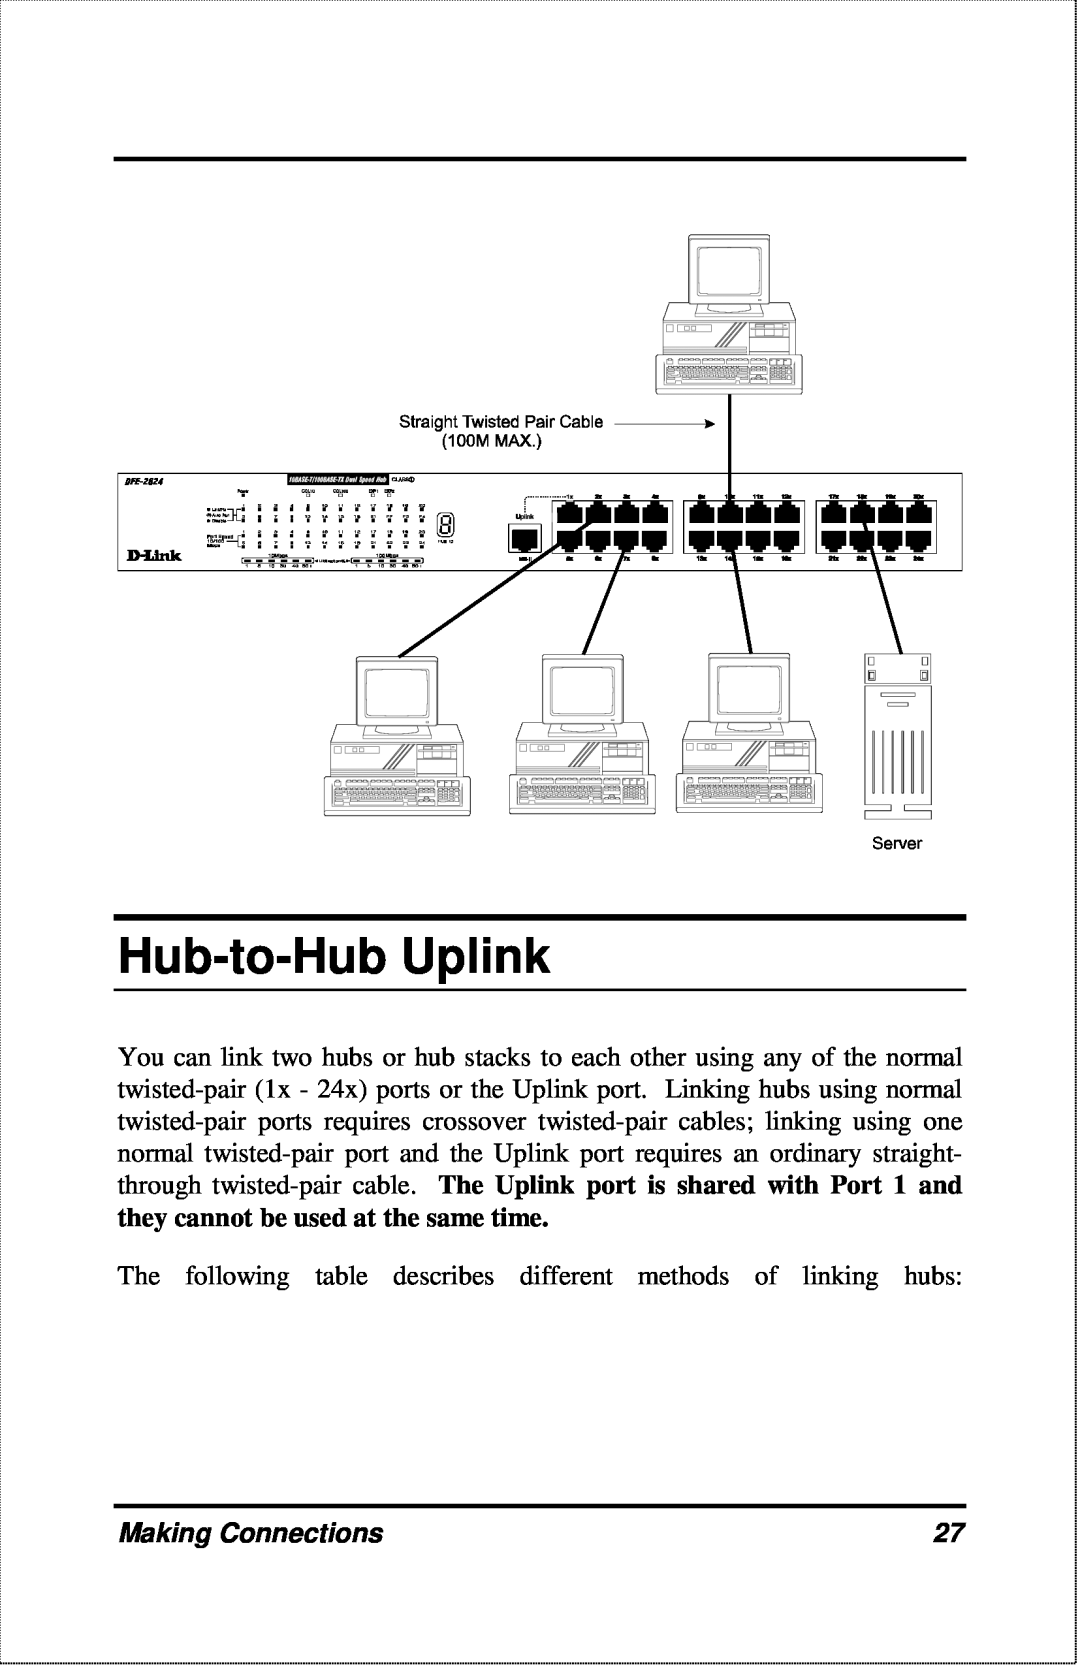 D-Link DFE-2600 manual Hub-to-Hub Uplink, they cannot be used at the same time, Making Connections 